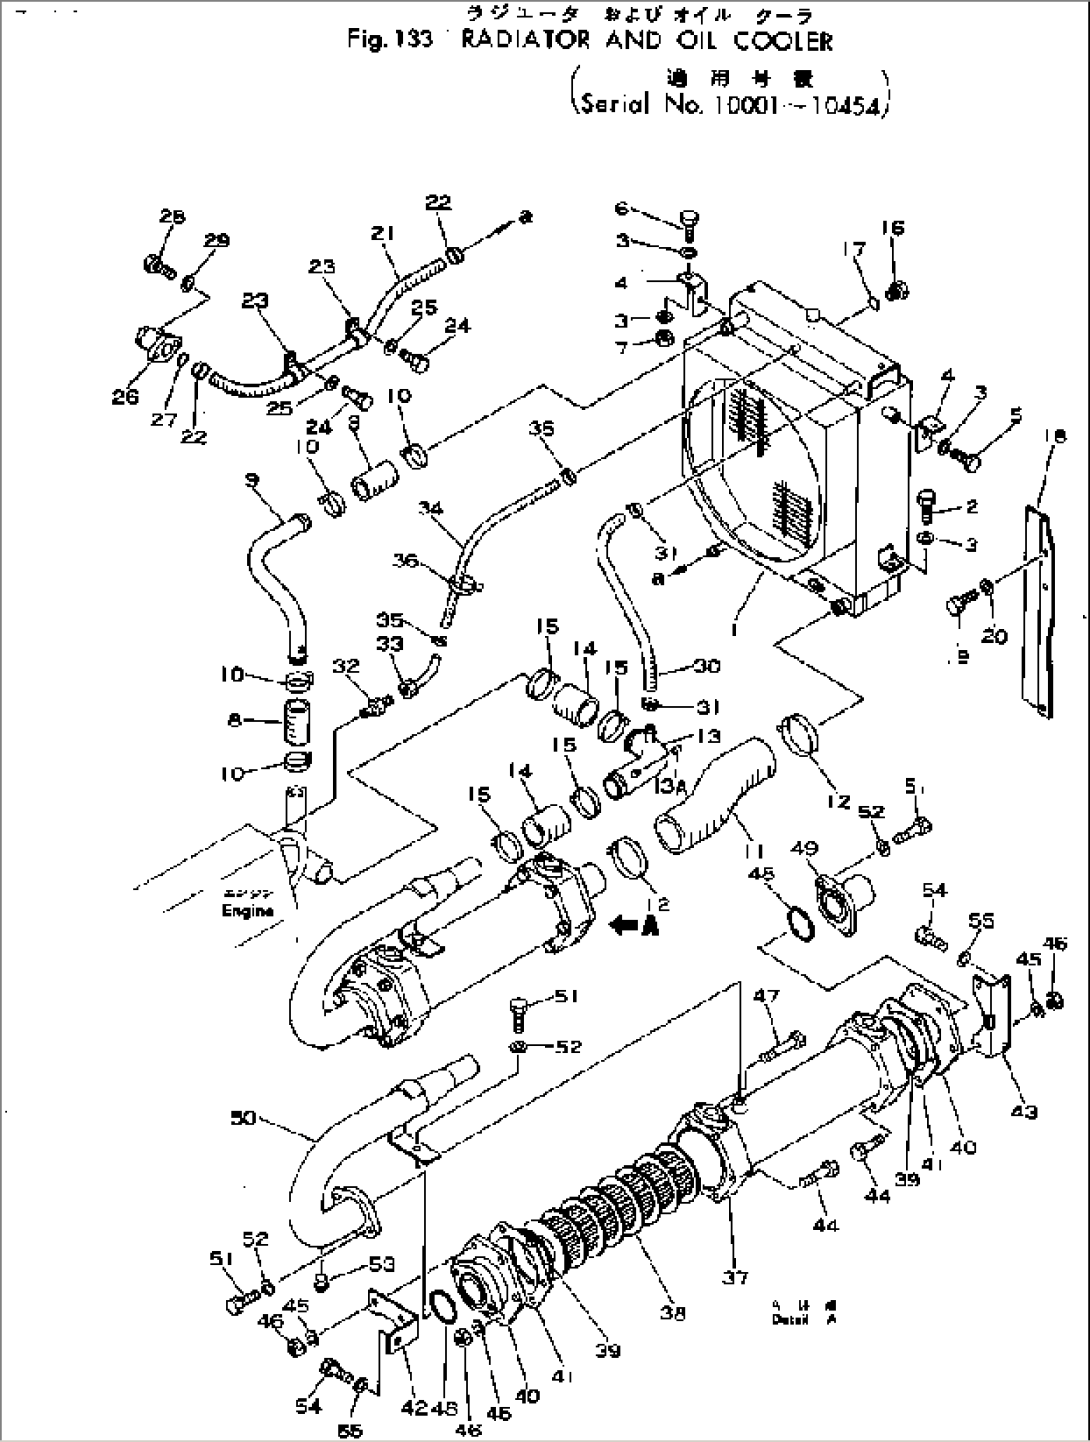 RADIATOR AND OIL COOLER(#10001-10454)